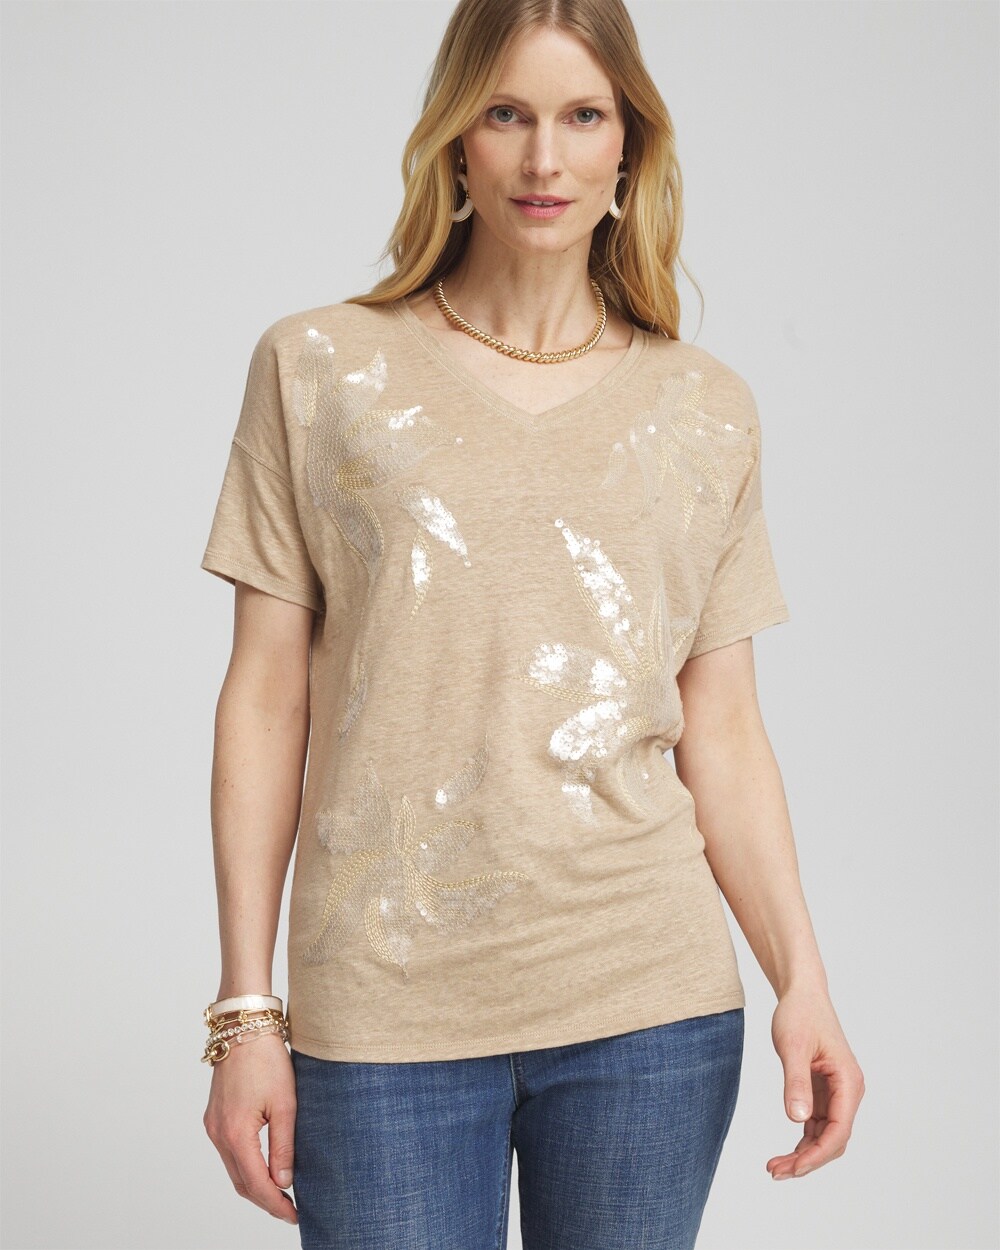 Neutral Sequin Embellished Tee